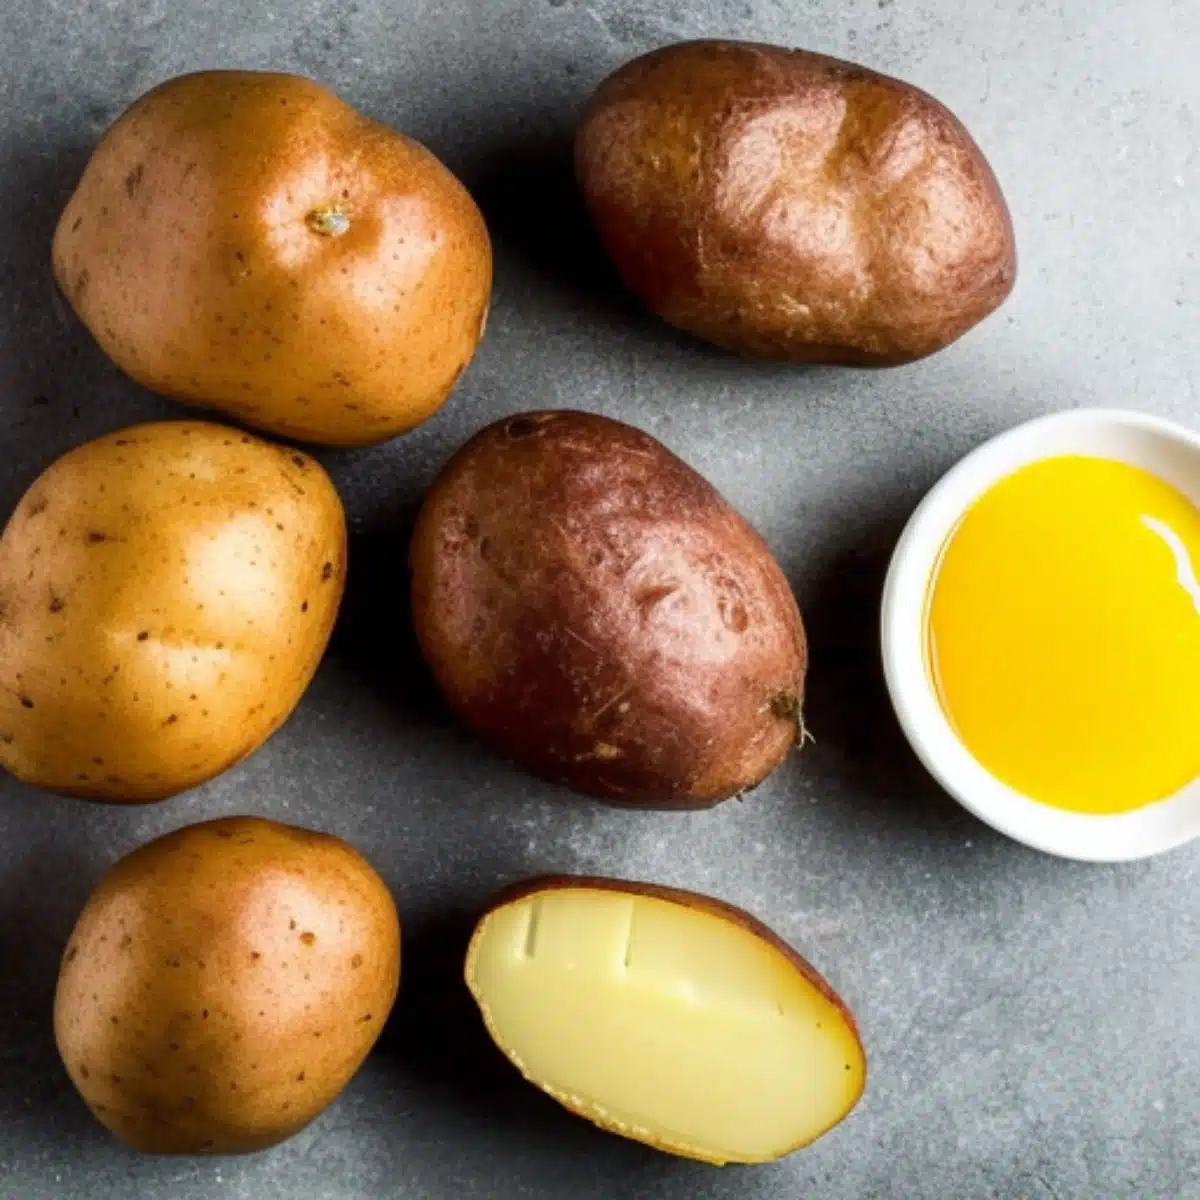 Square image of different types of potatoes.